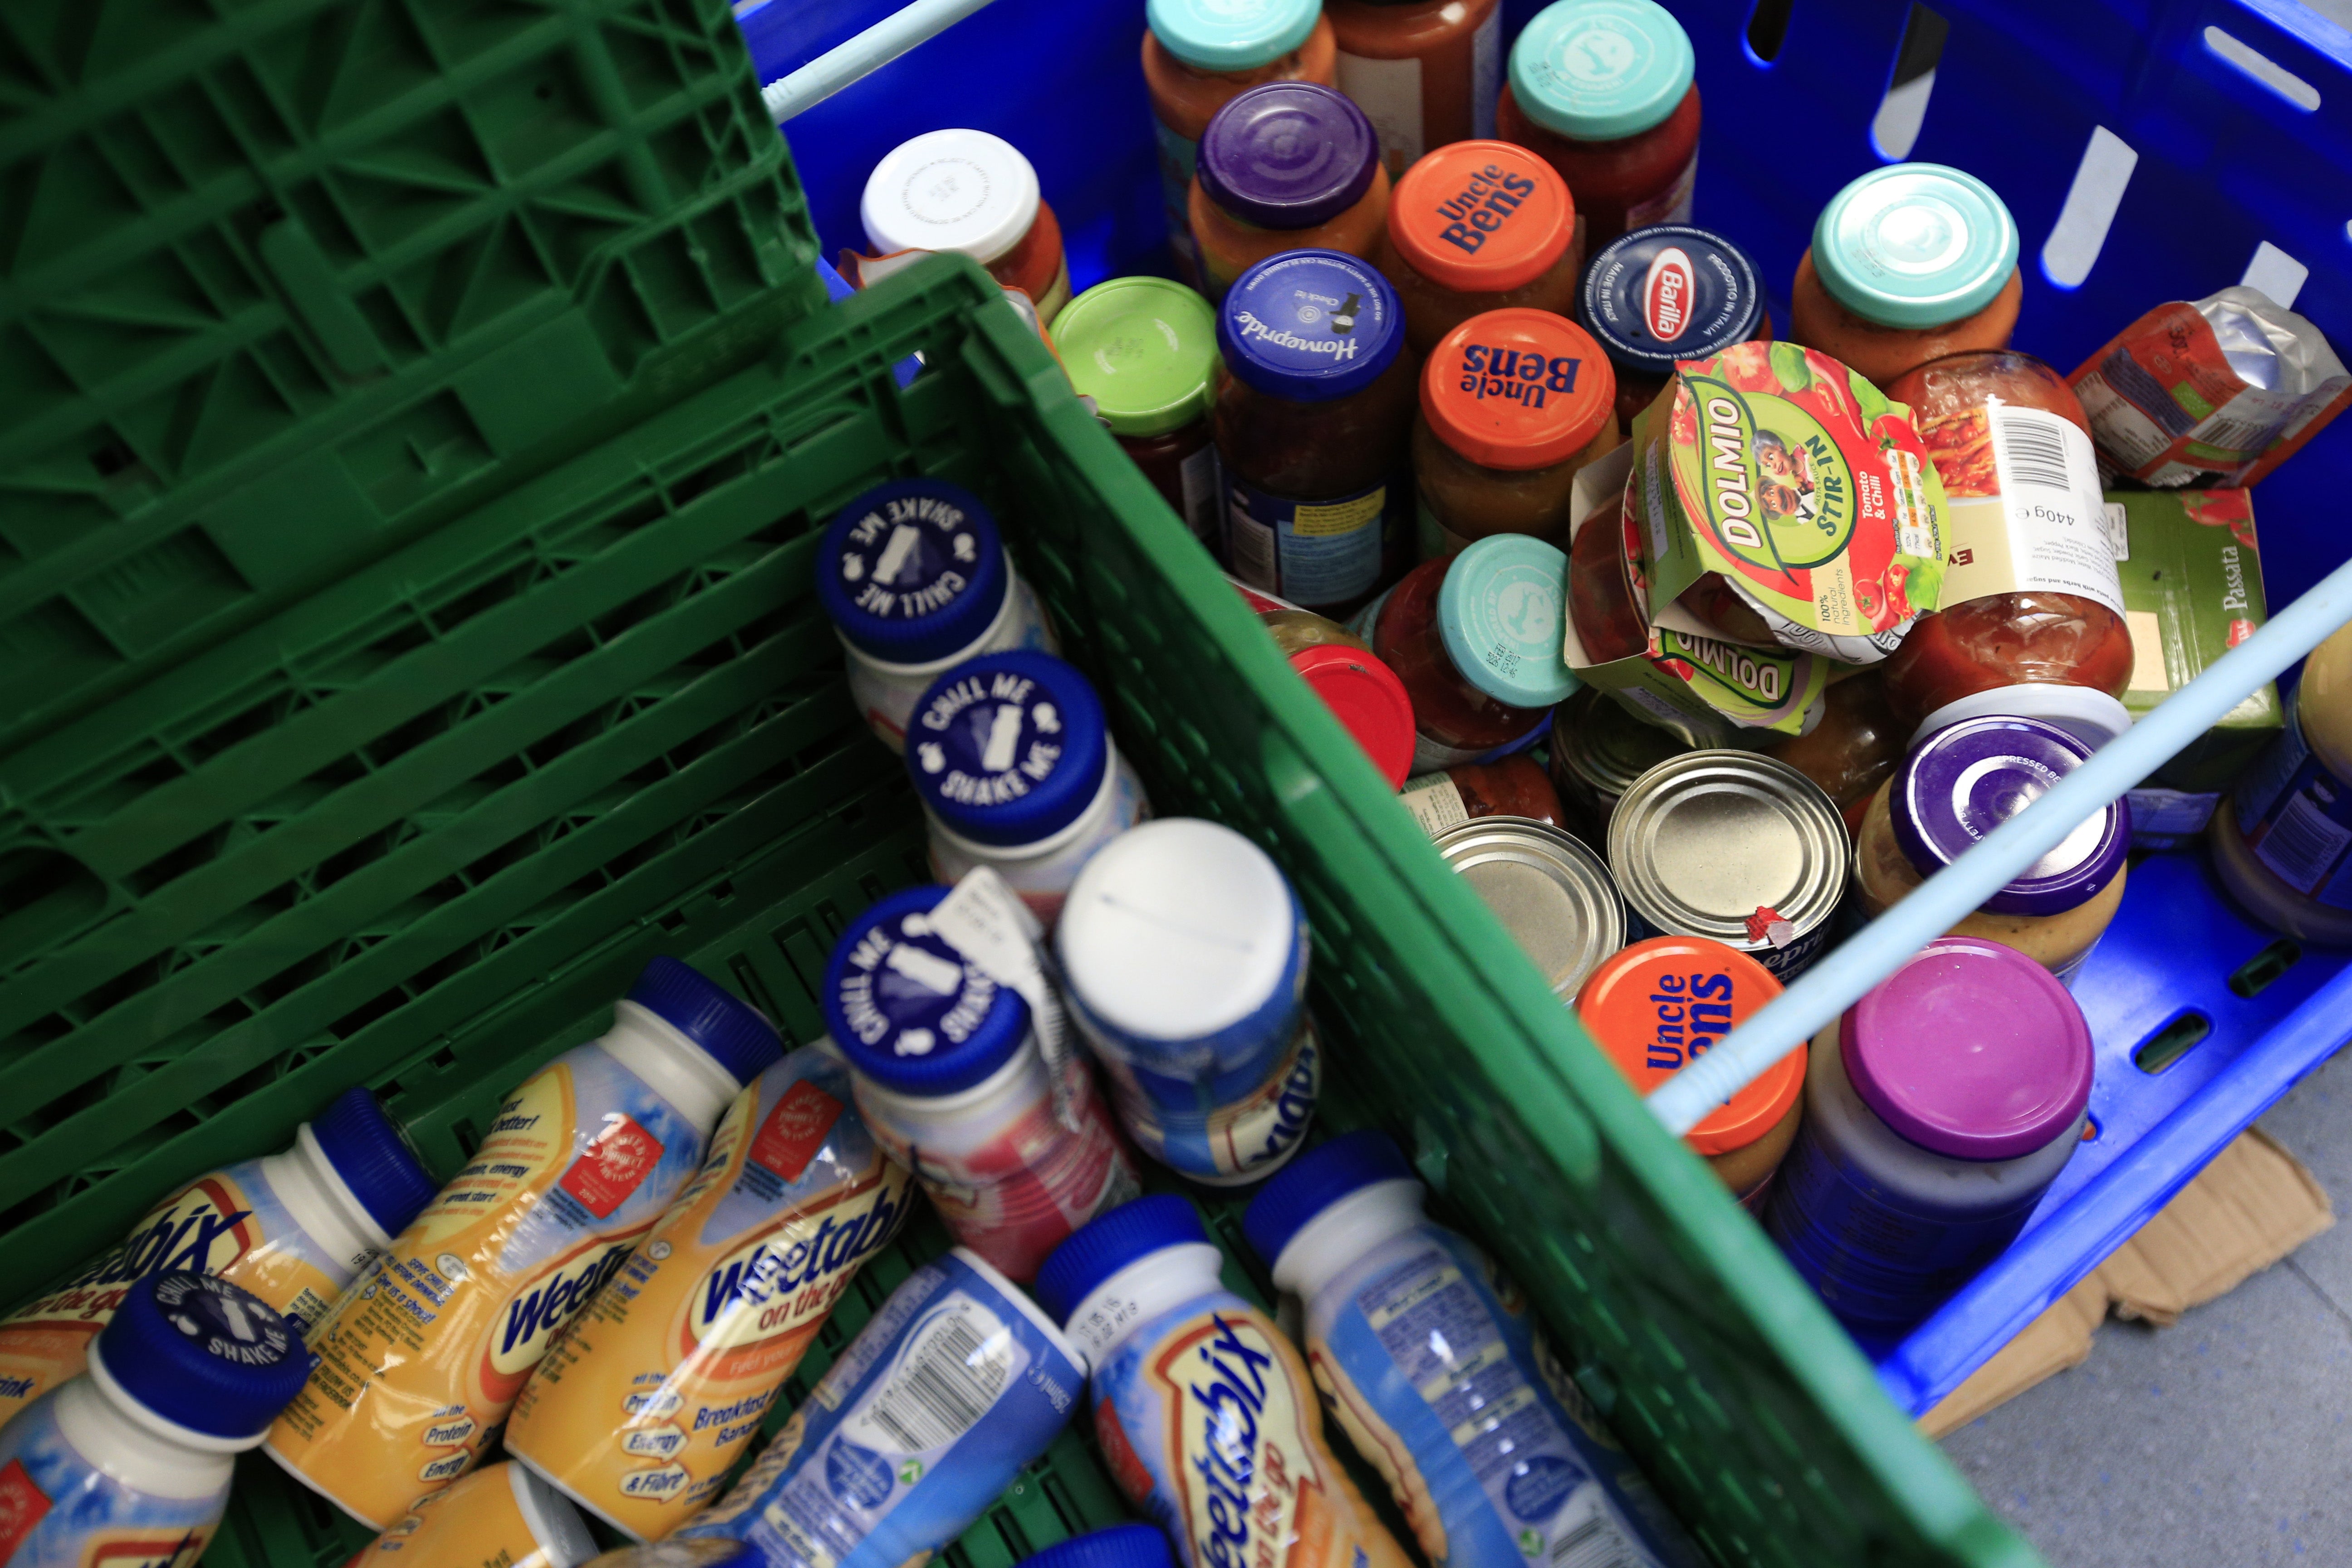 Director at the Food Aid Network reports ‘unprecedented demand’ for food parcels